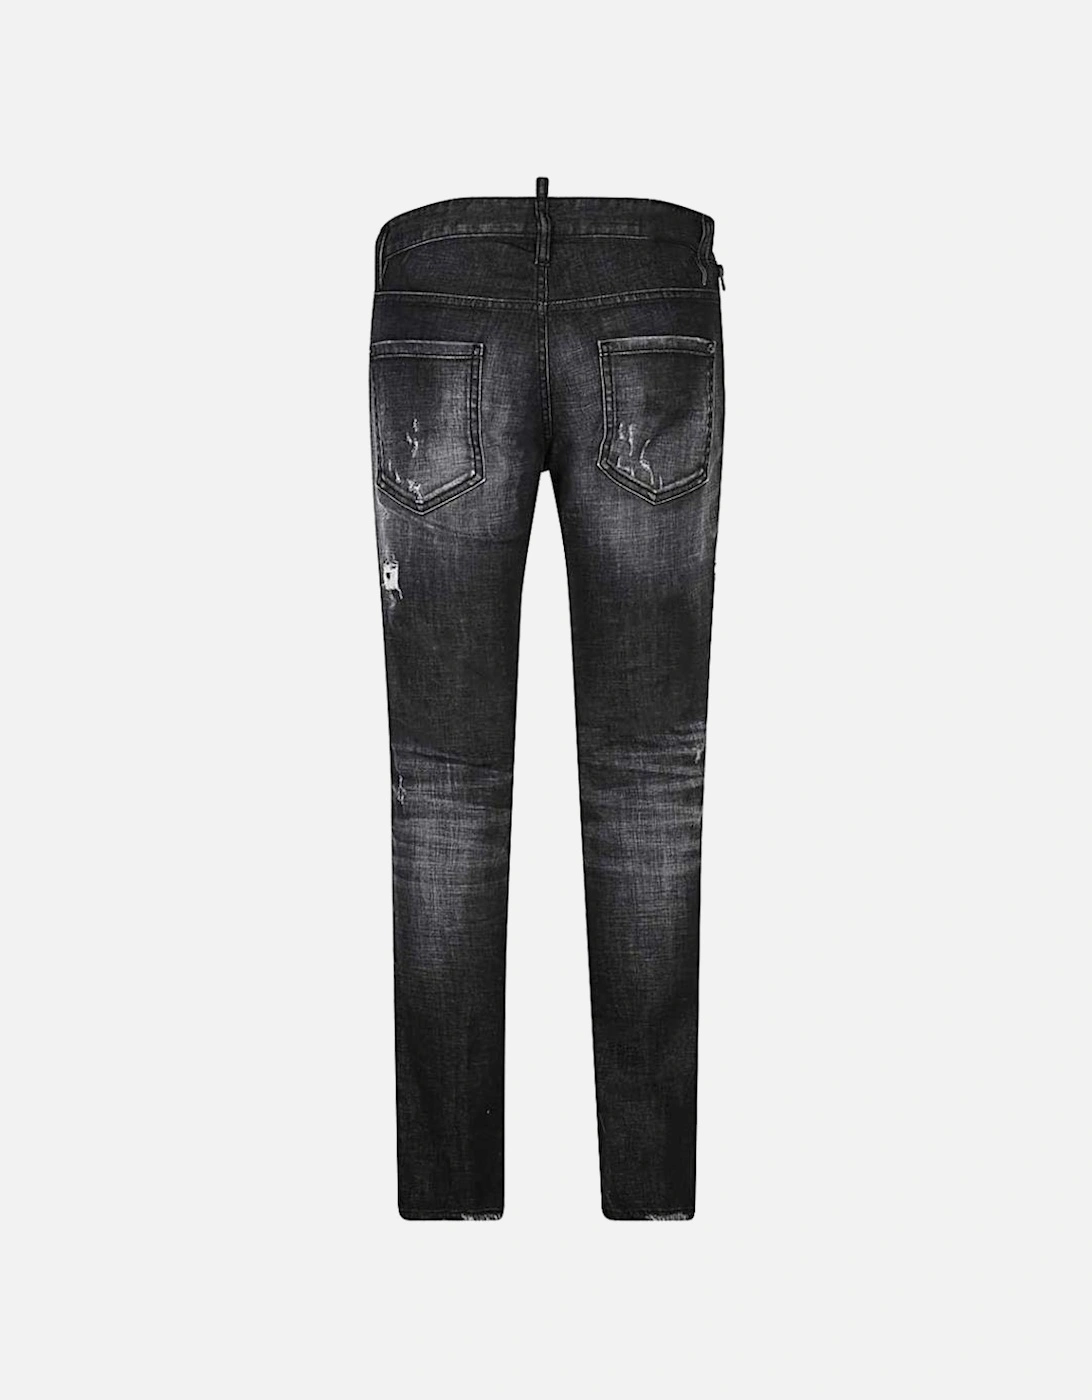 Canadian Heritage Cool Guy Jean Black Jeans